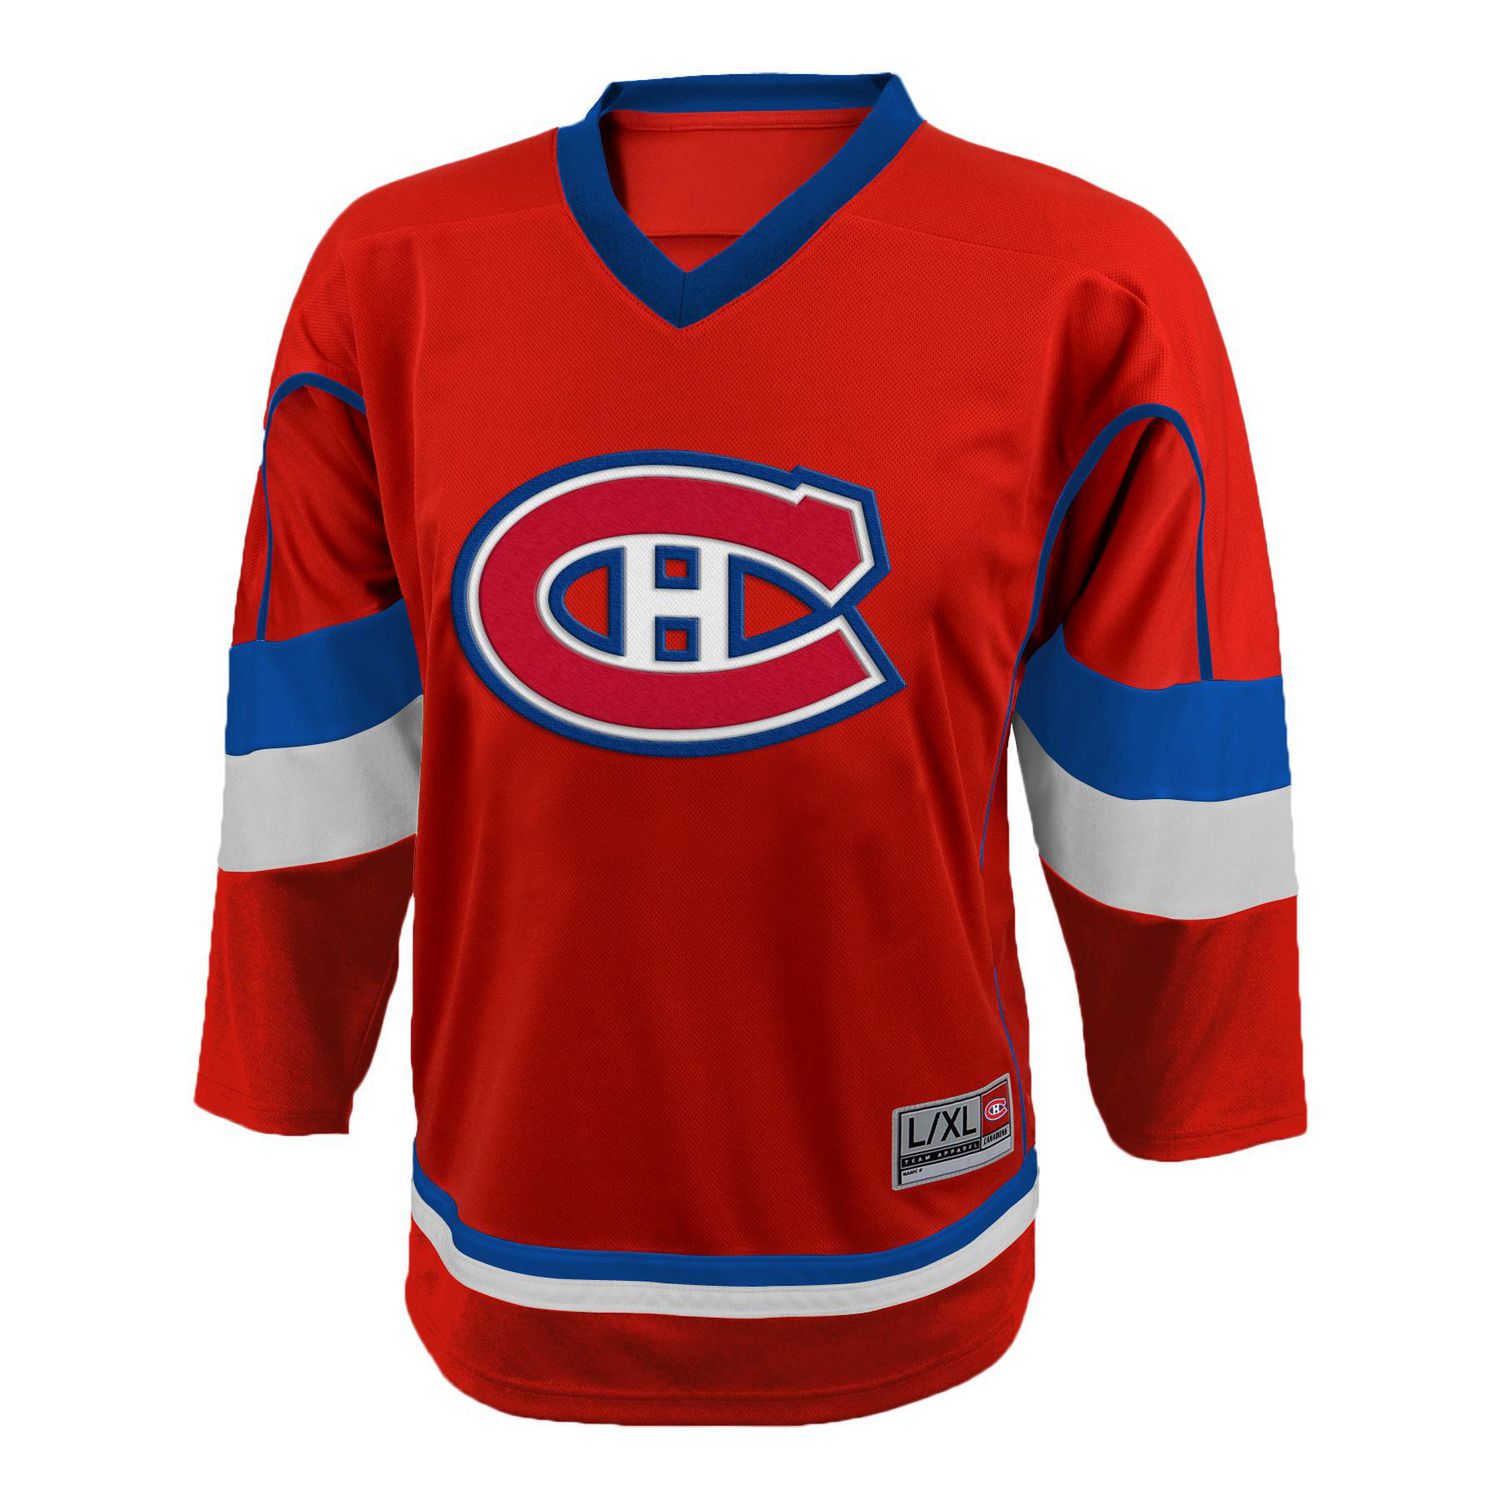 NHL Team Apparel Montréal Canadiens Stitched Youth Jersey Size L/XL